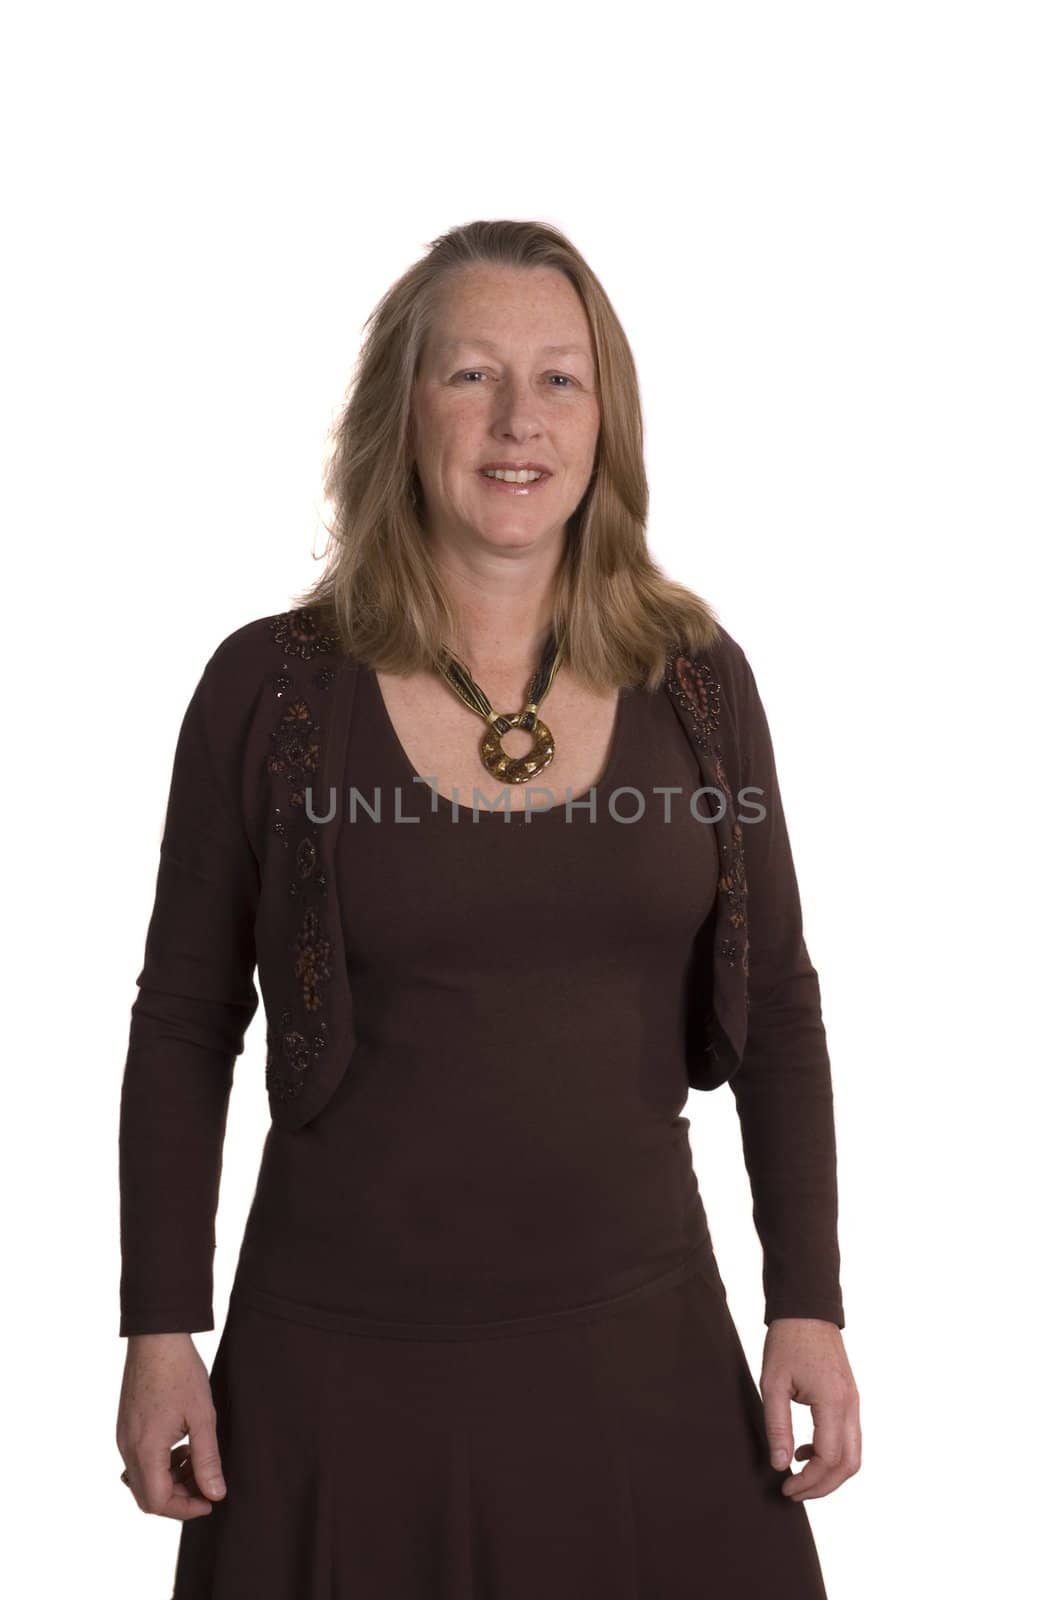 Friendly smiling middle-aged woman shot from above for dating service image, isolated on white